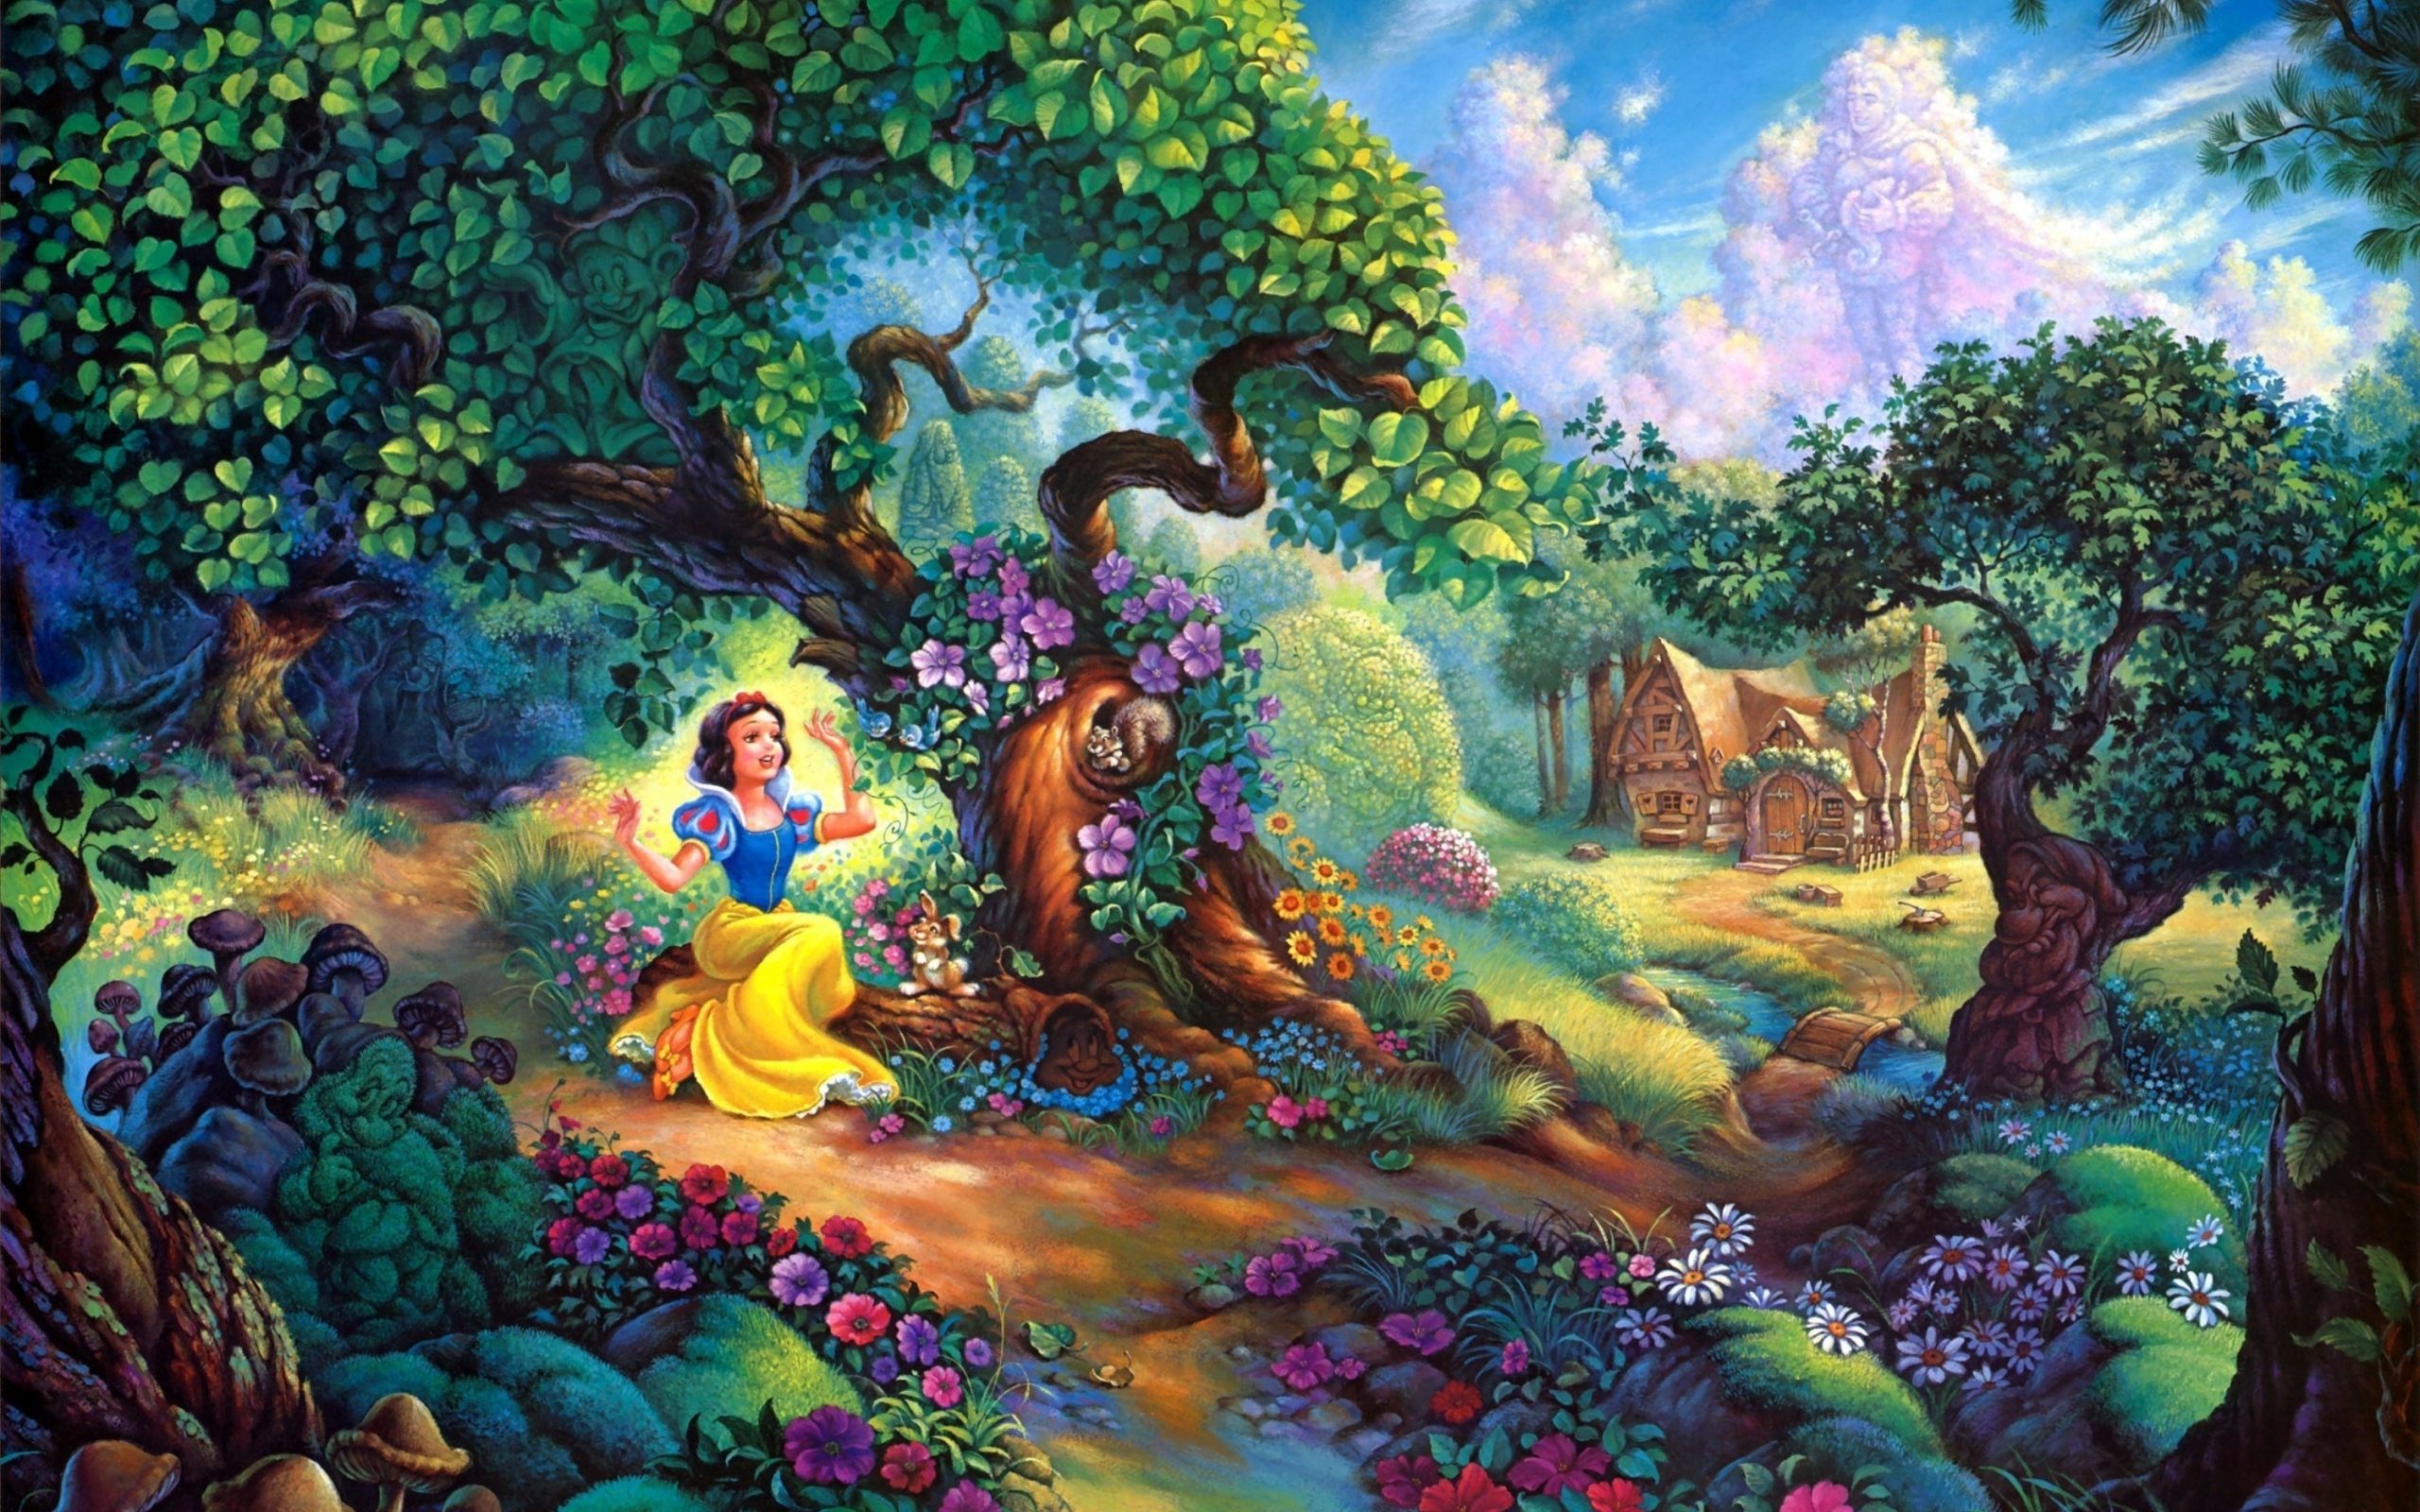 Disney Wallpapers   HD Wallpapers Backgrounds of Your Choice 2560x1600